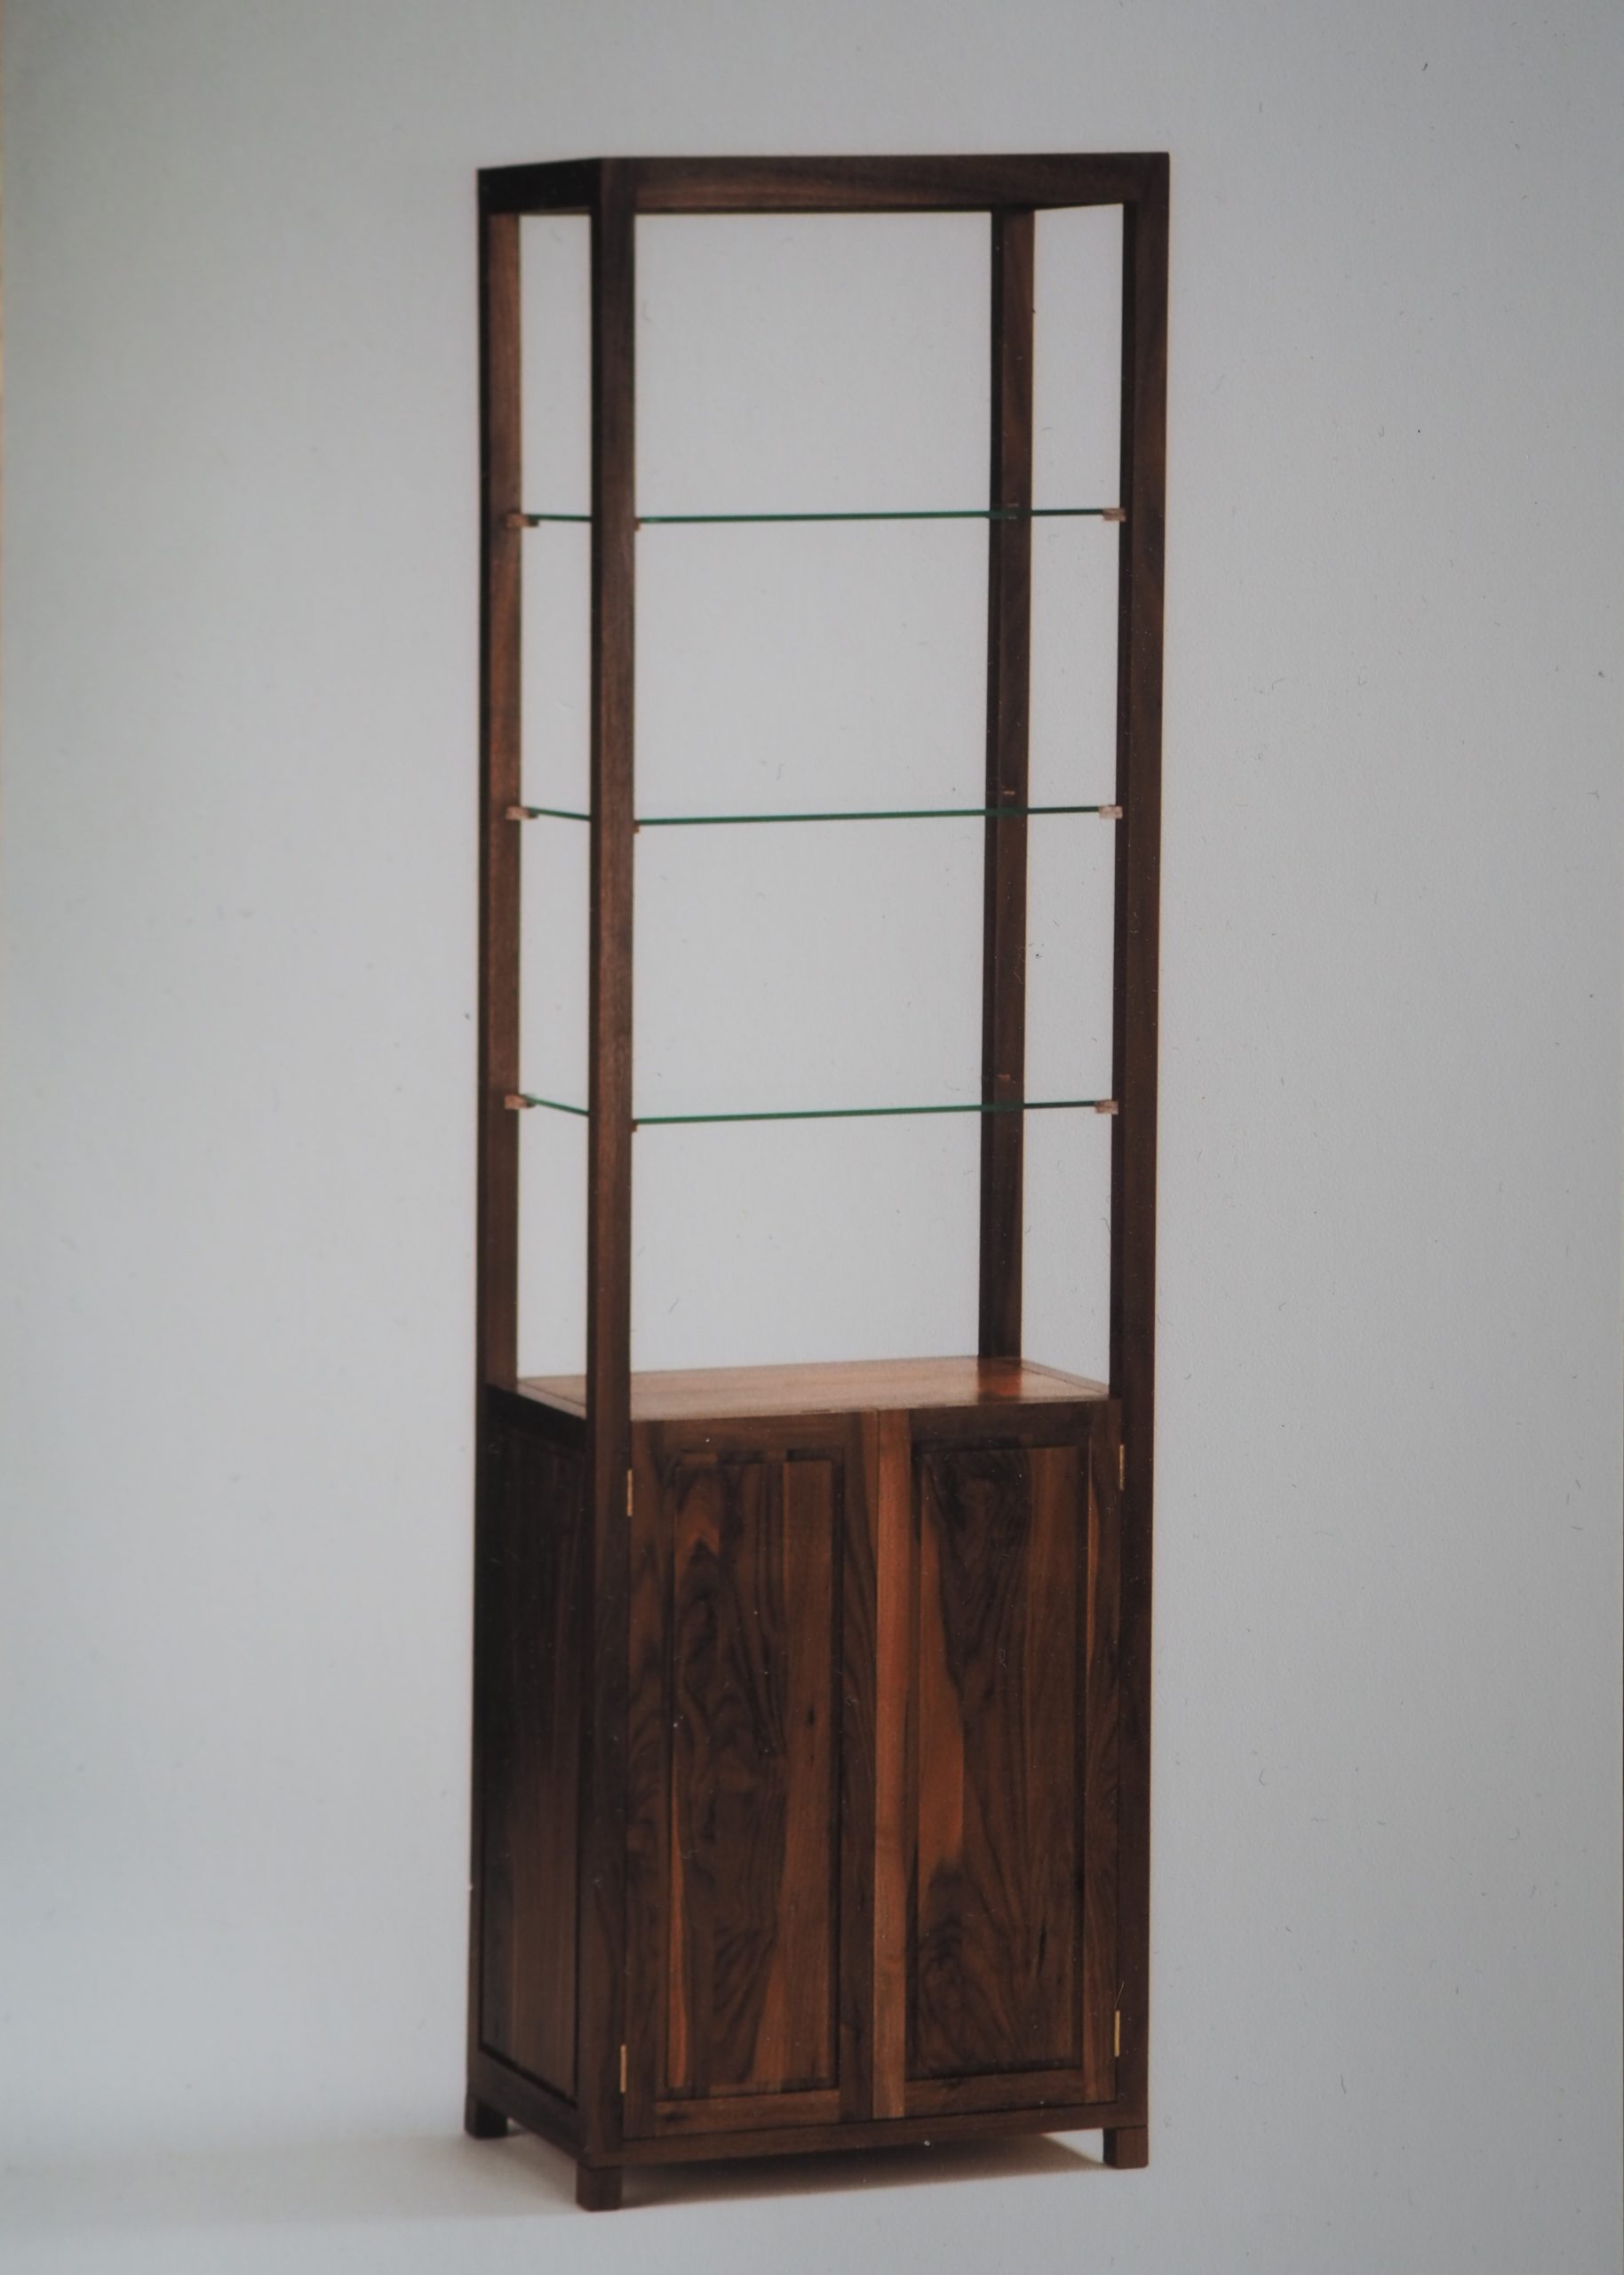 Display Cabinet in American Black Walnut with open glass shelving. Storage cupboard underneath shelving. light and airy cabinet to complement and show your displays.